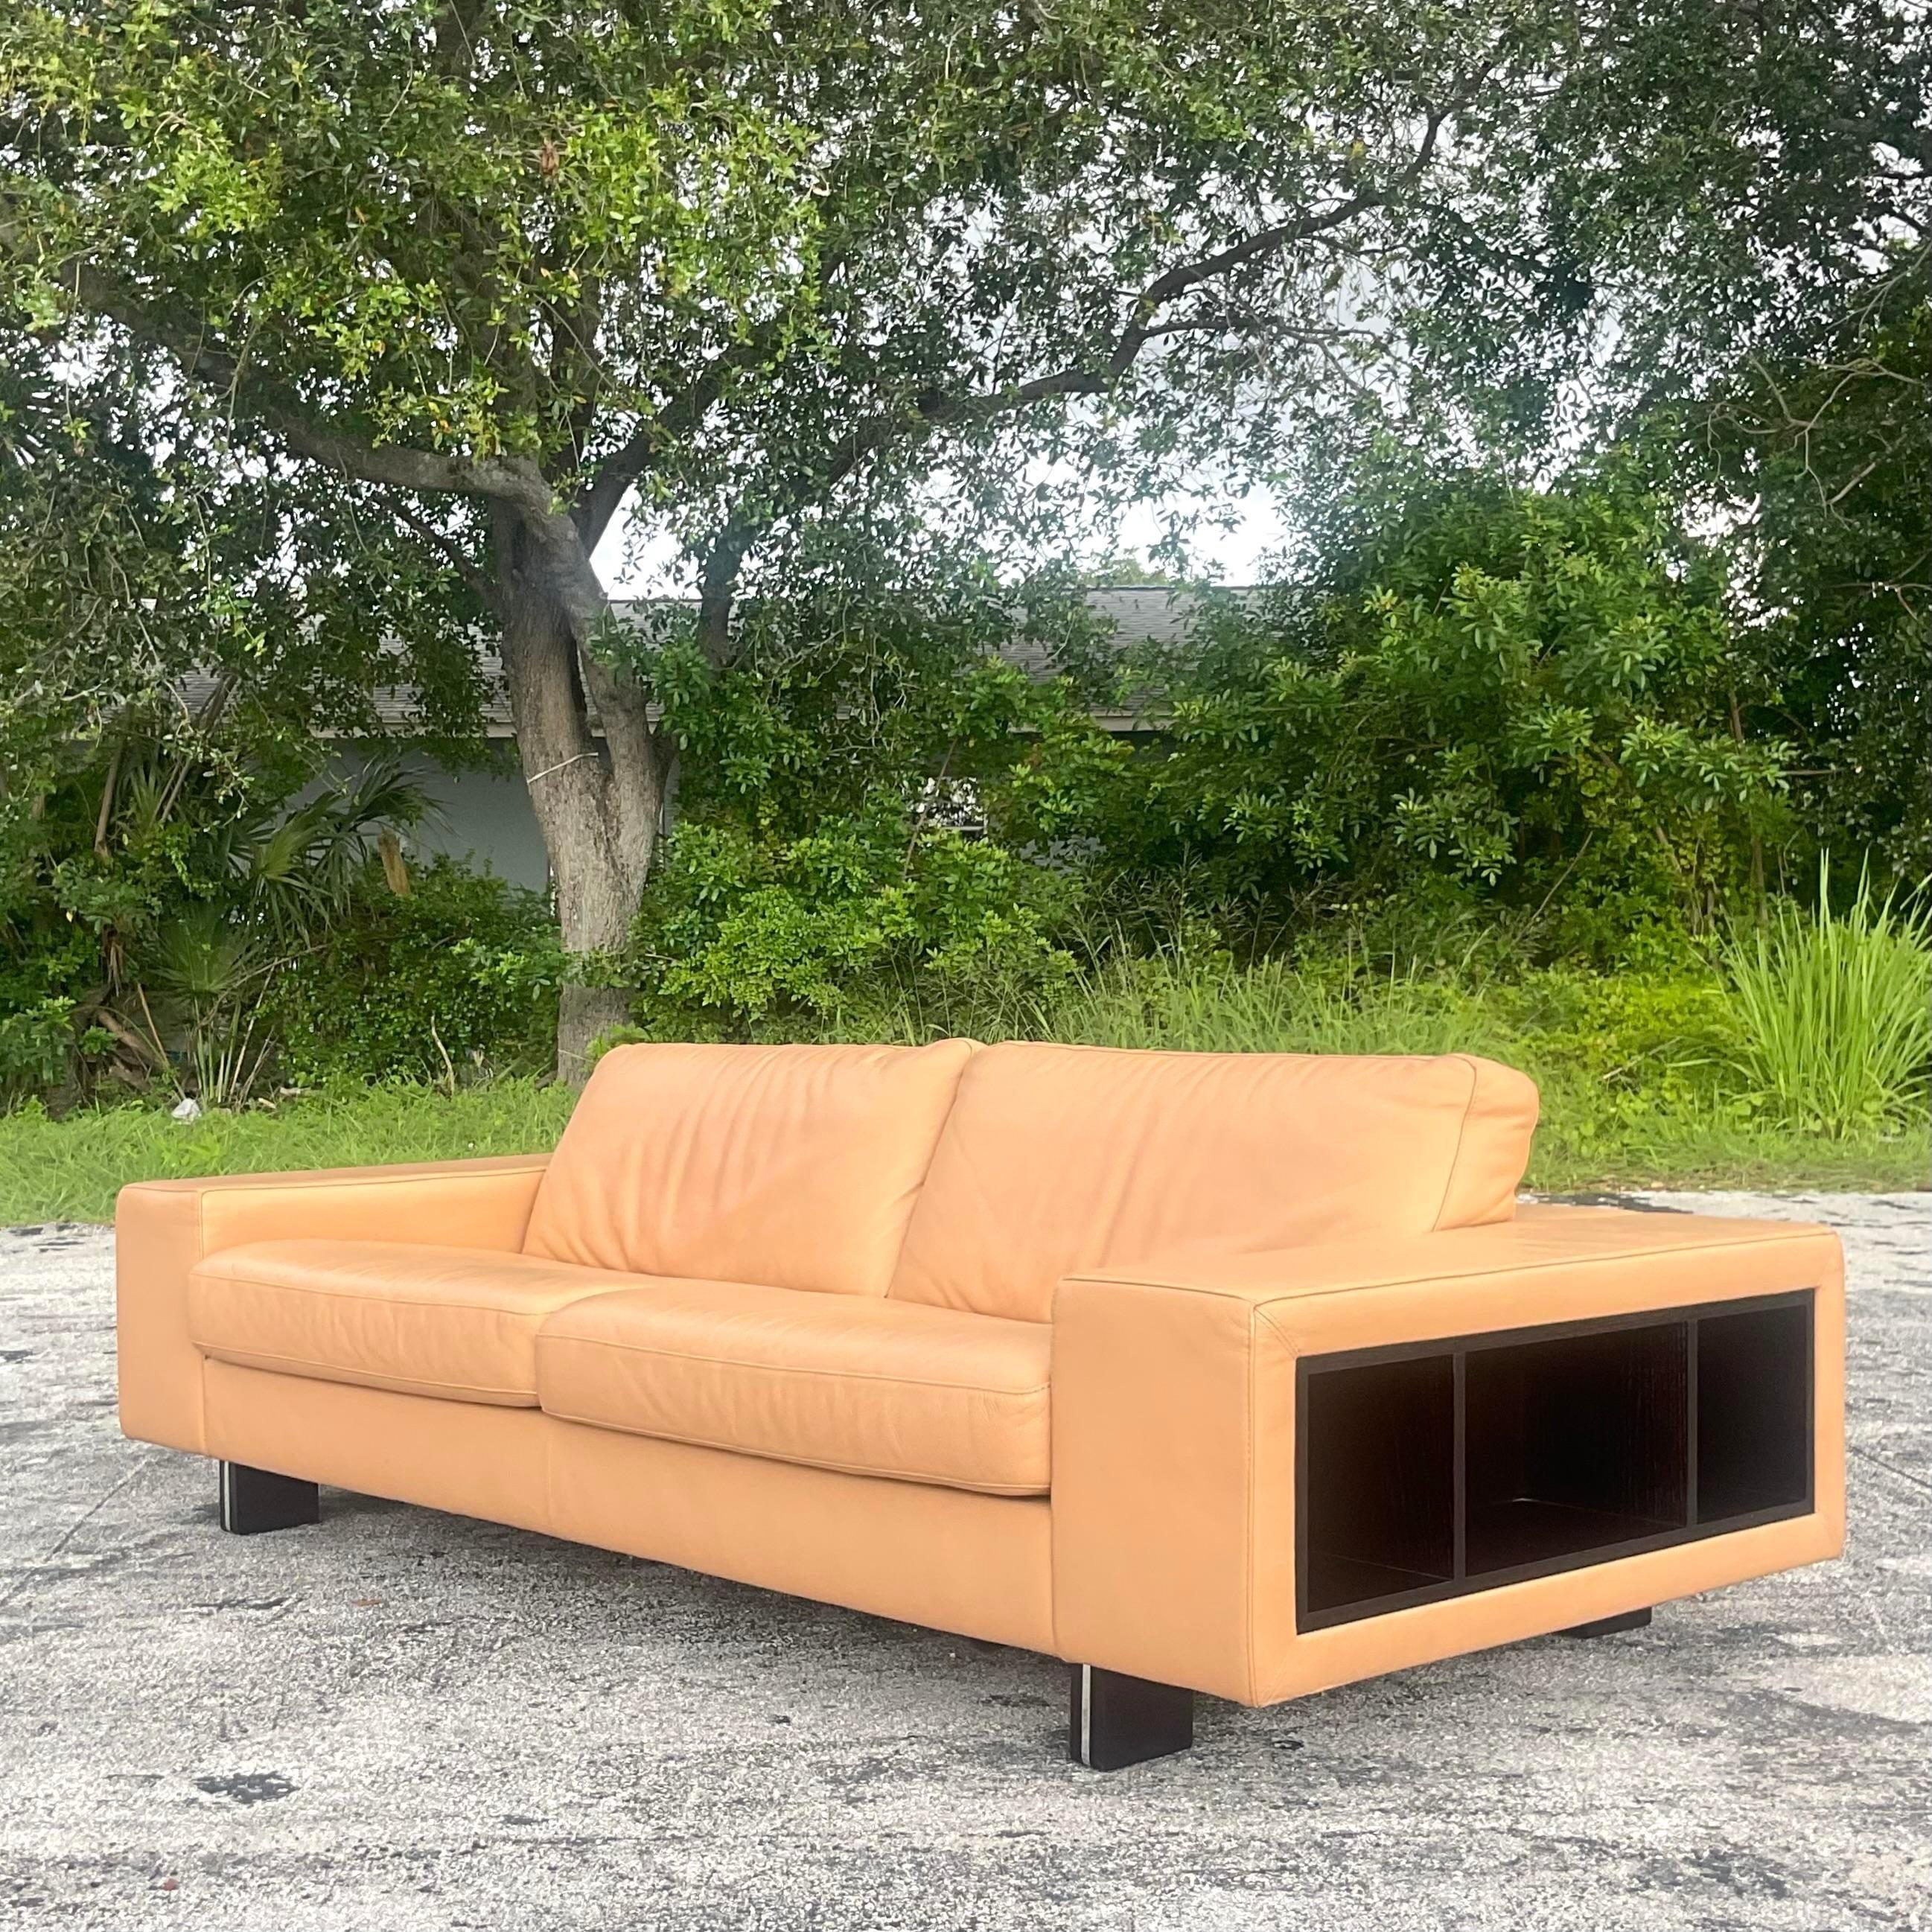 An exceptional vintage Boho leather sofa. Made by the iconic Roche Bobois group and tagged below the seat. A chic low profile in leather with ebony blade legs. Wrap around open cabinets for display. Acquired from a Palm Beach estate